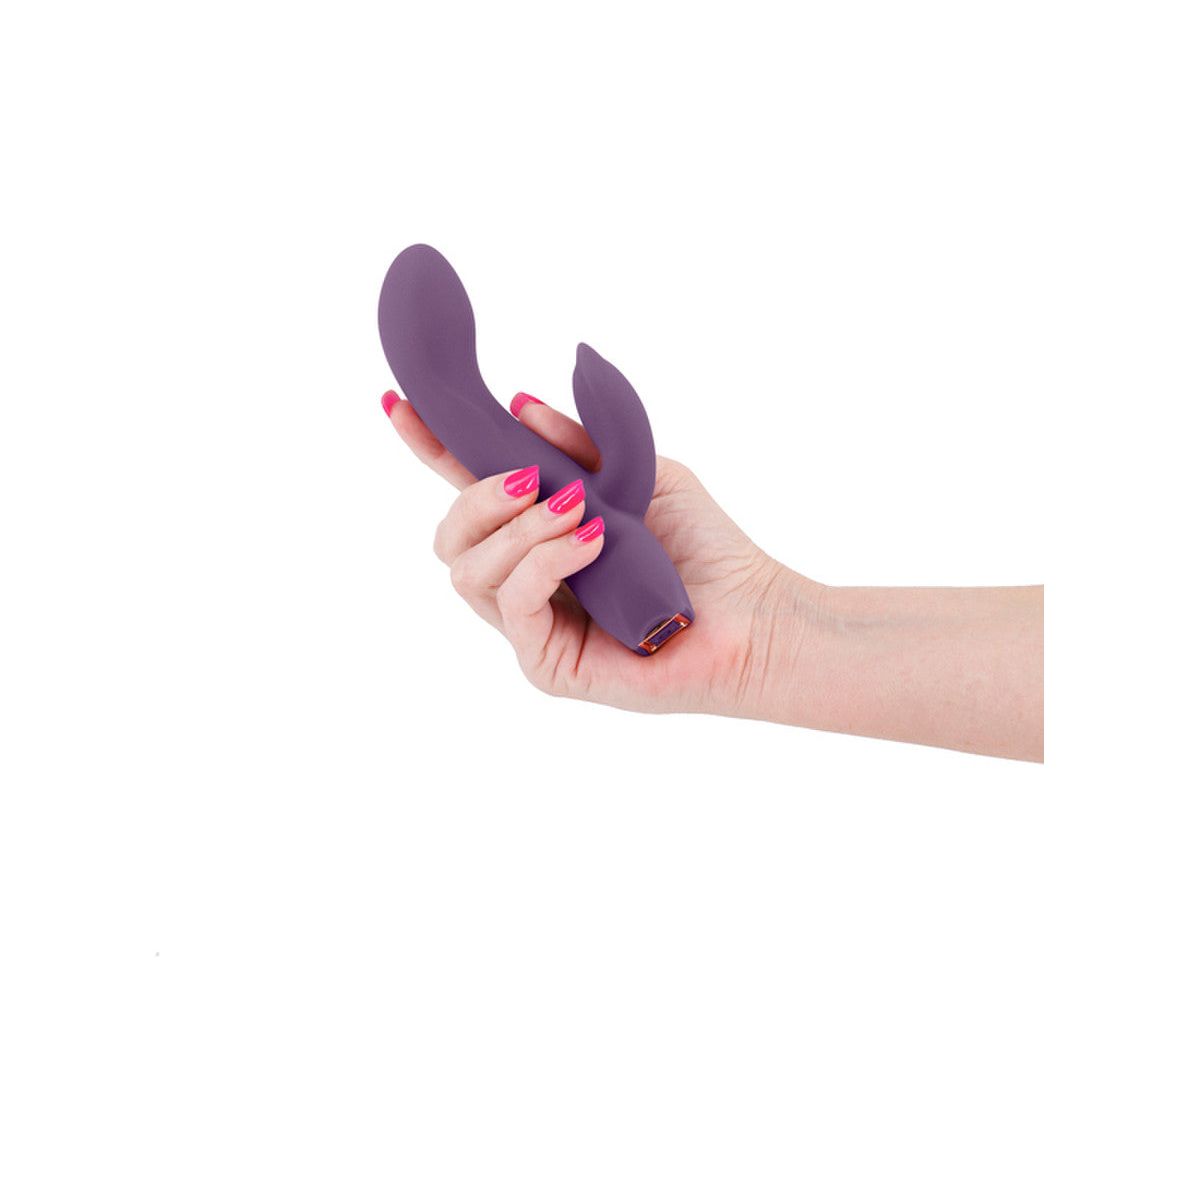 Obsessions “Juliet” Rechargeable Rabbit Vibrator